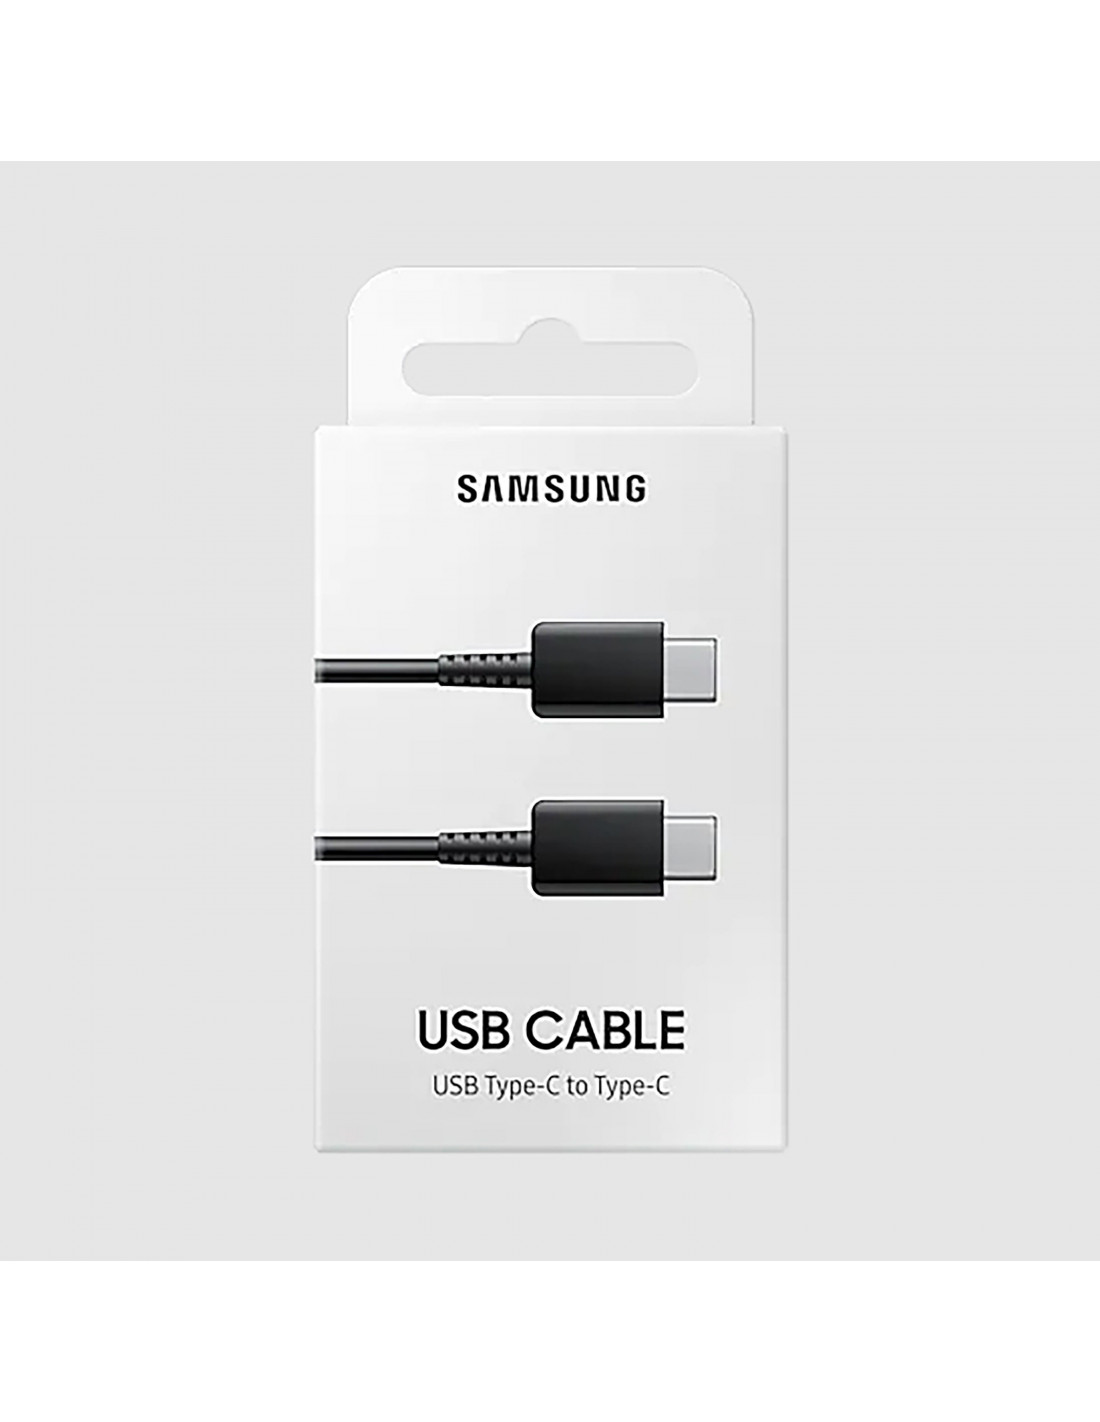 CABLE SAMSUNG TIPO C A TIPO C